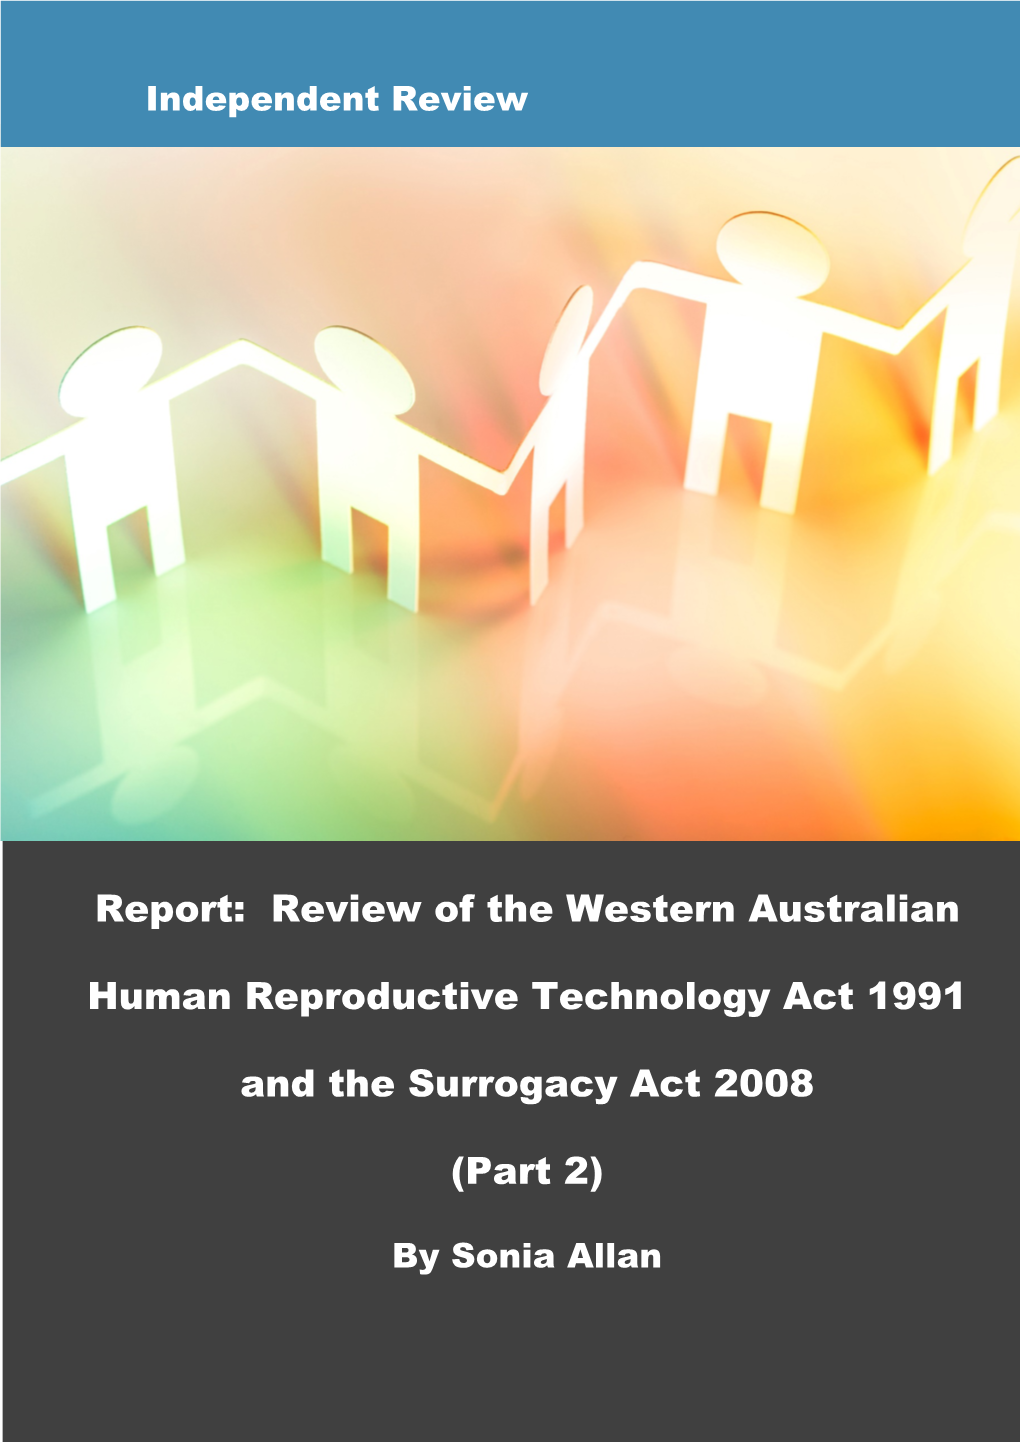 Review of the Western Australian Human Reproductive Technology Act 1991 and the Surrogacy Act 2008 (Part 2)